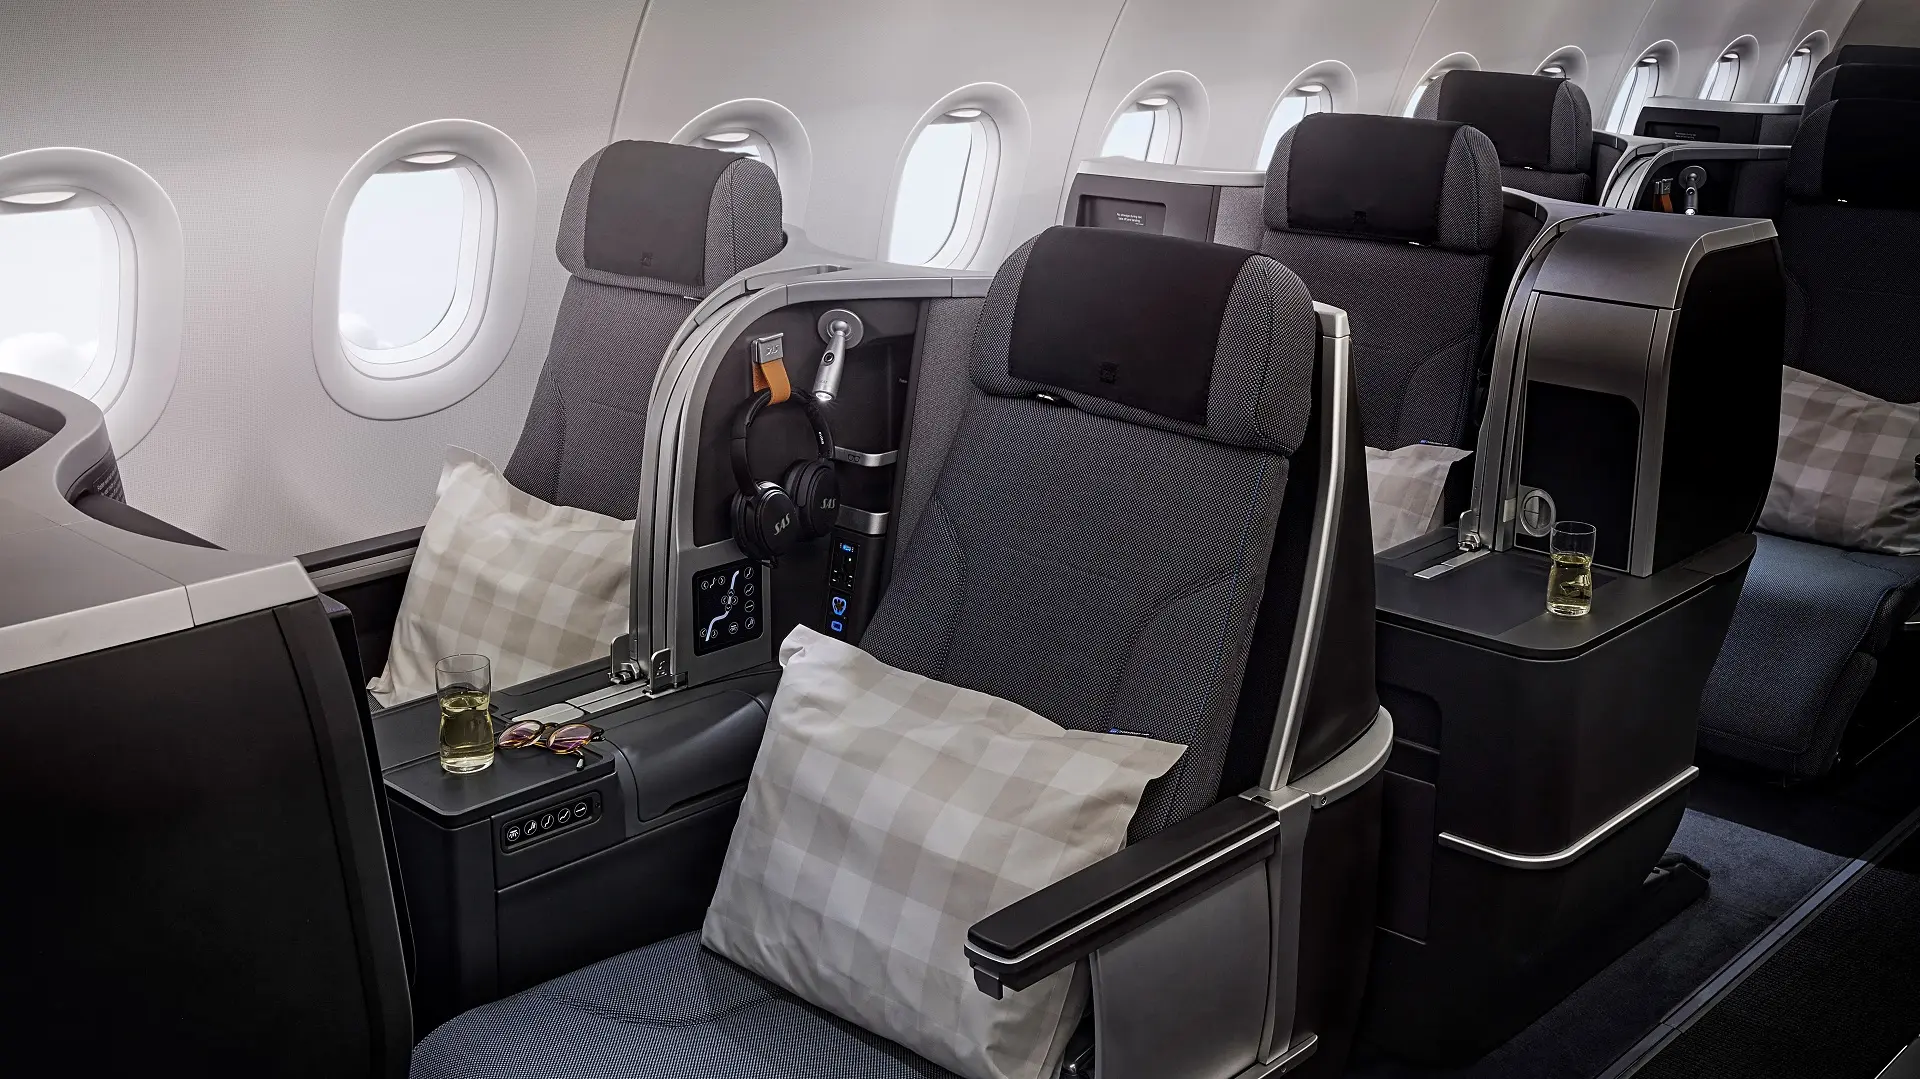 Airlines News - SAS rolls out its new A321LR Business Class cabin